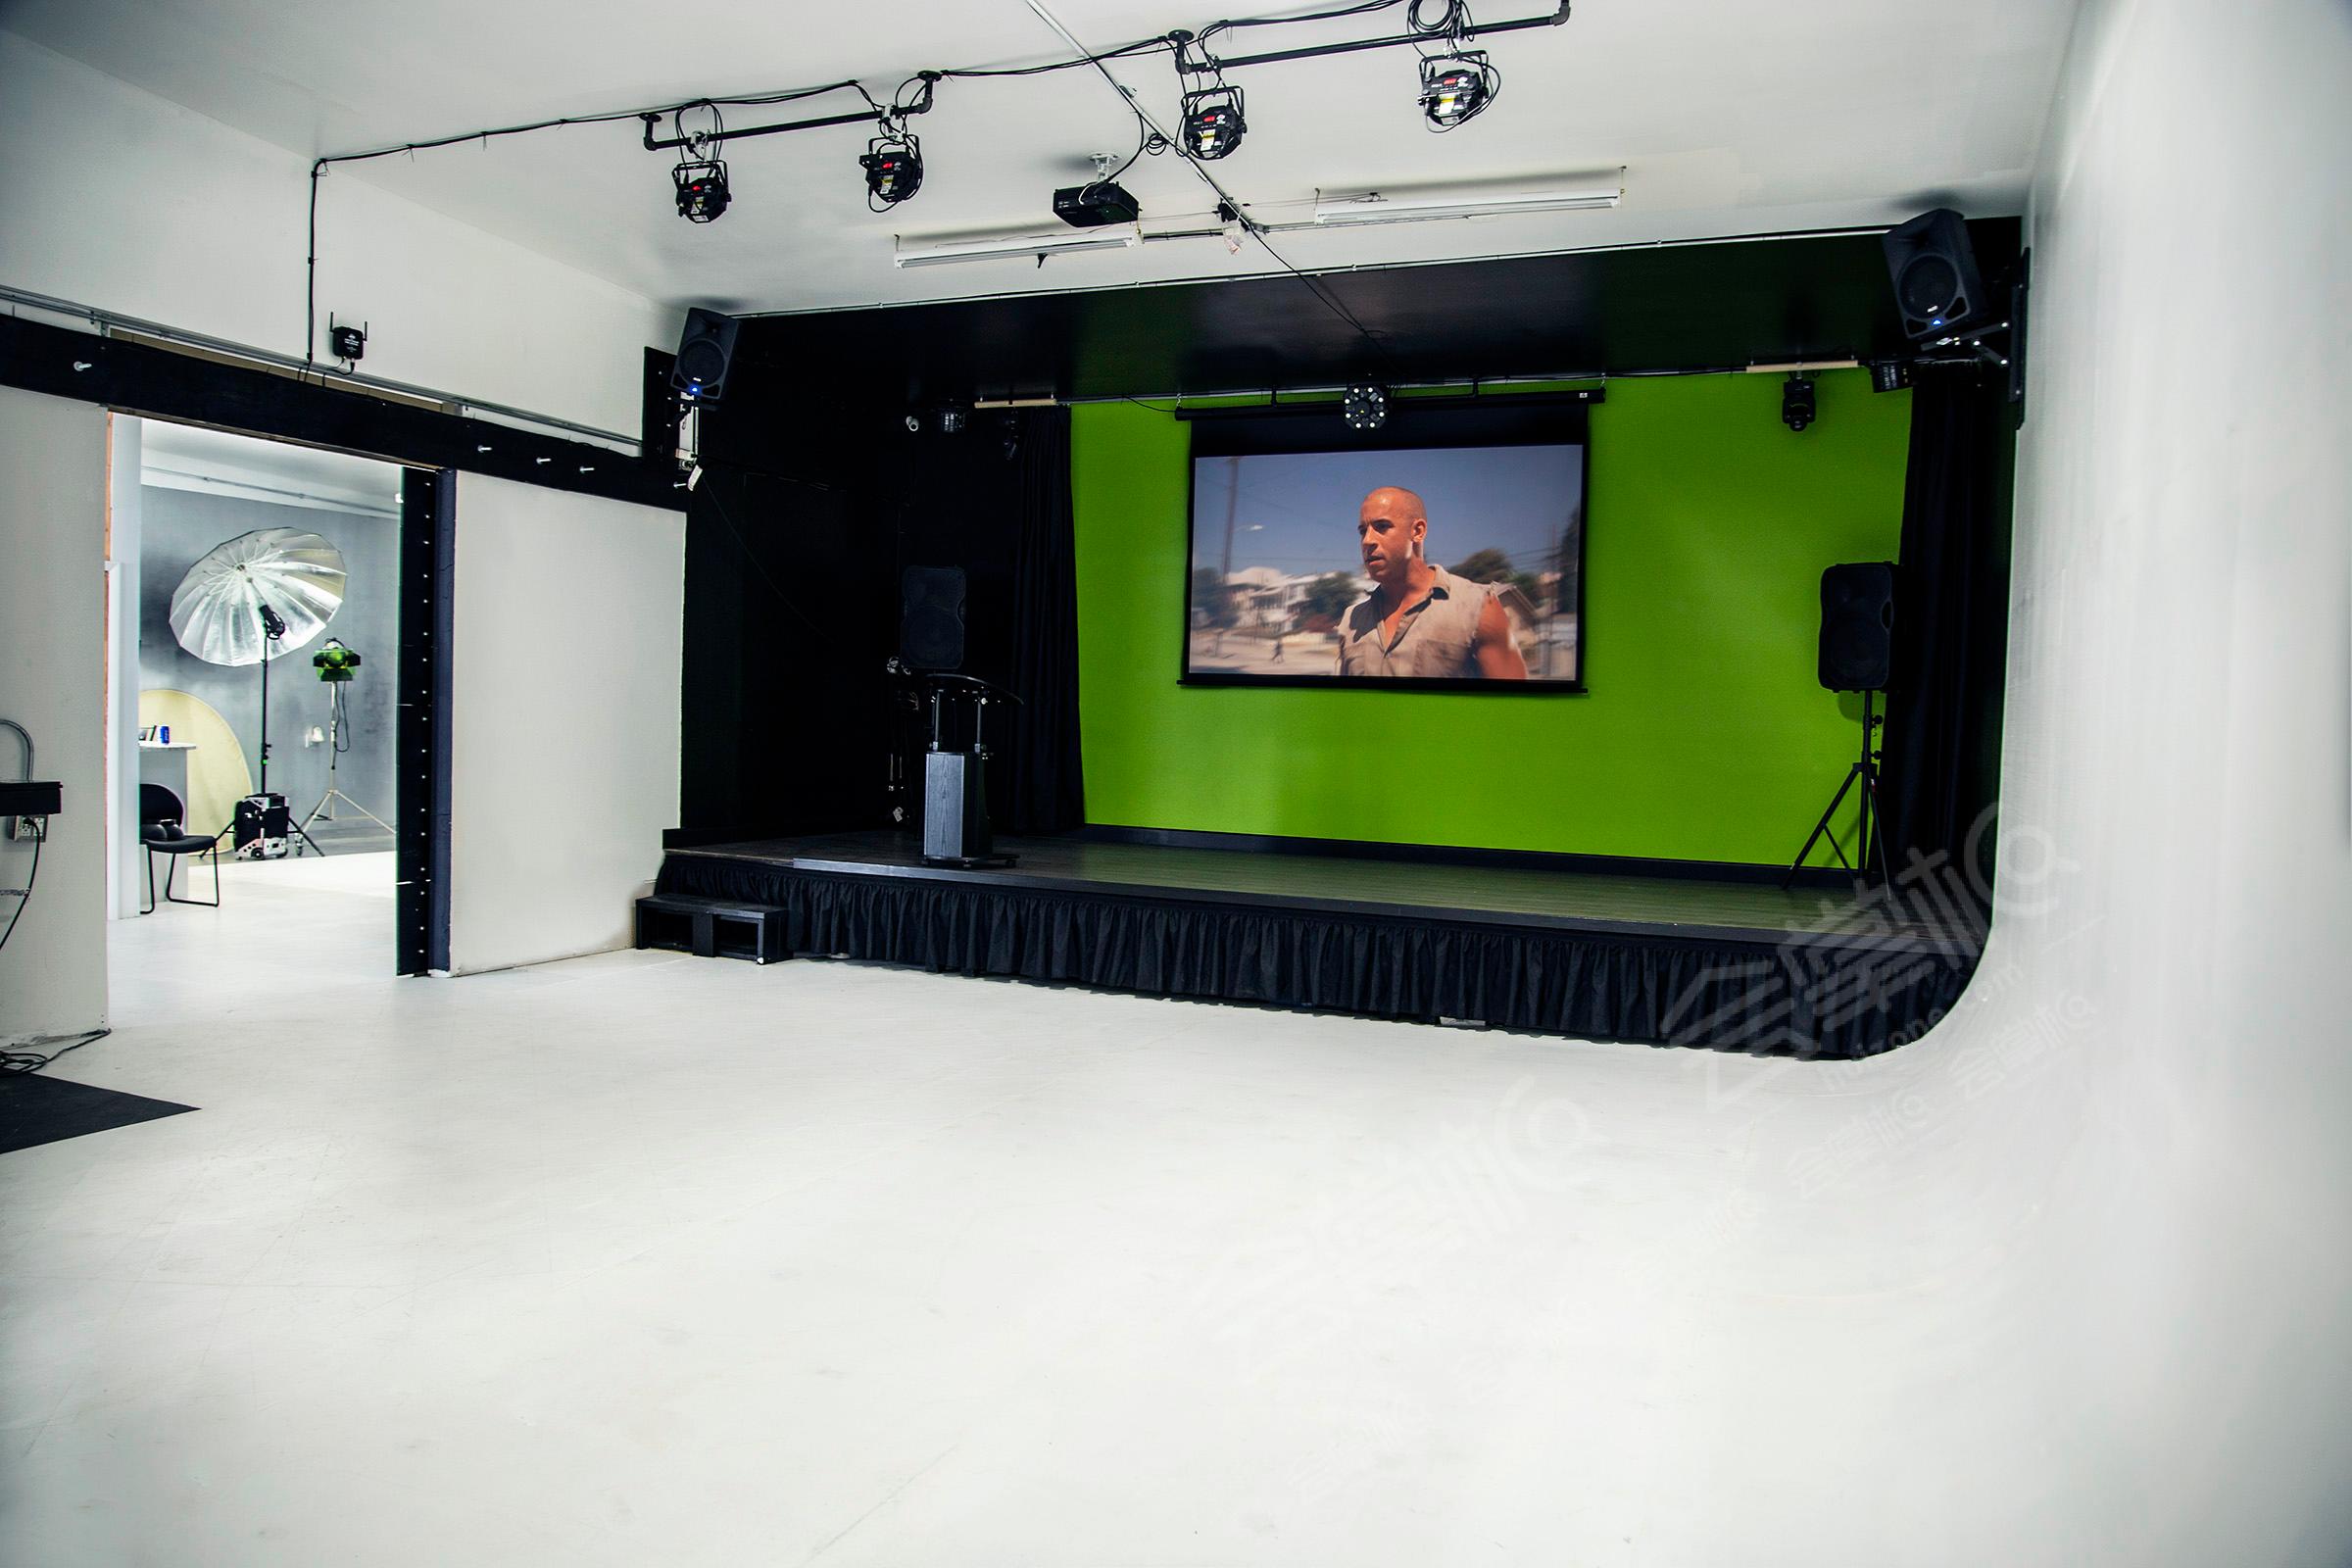 Production House & Creative Space